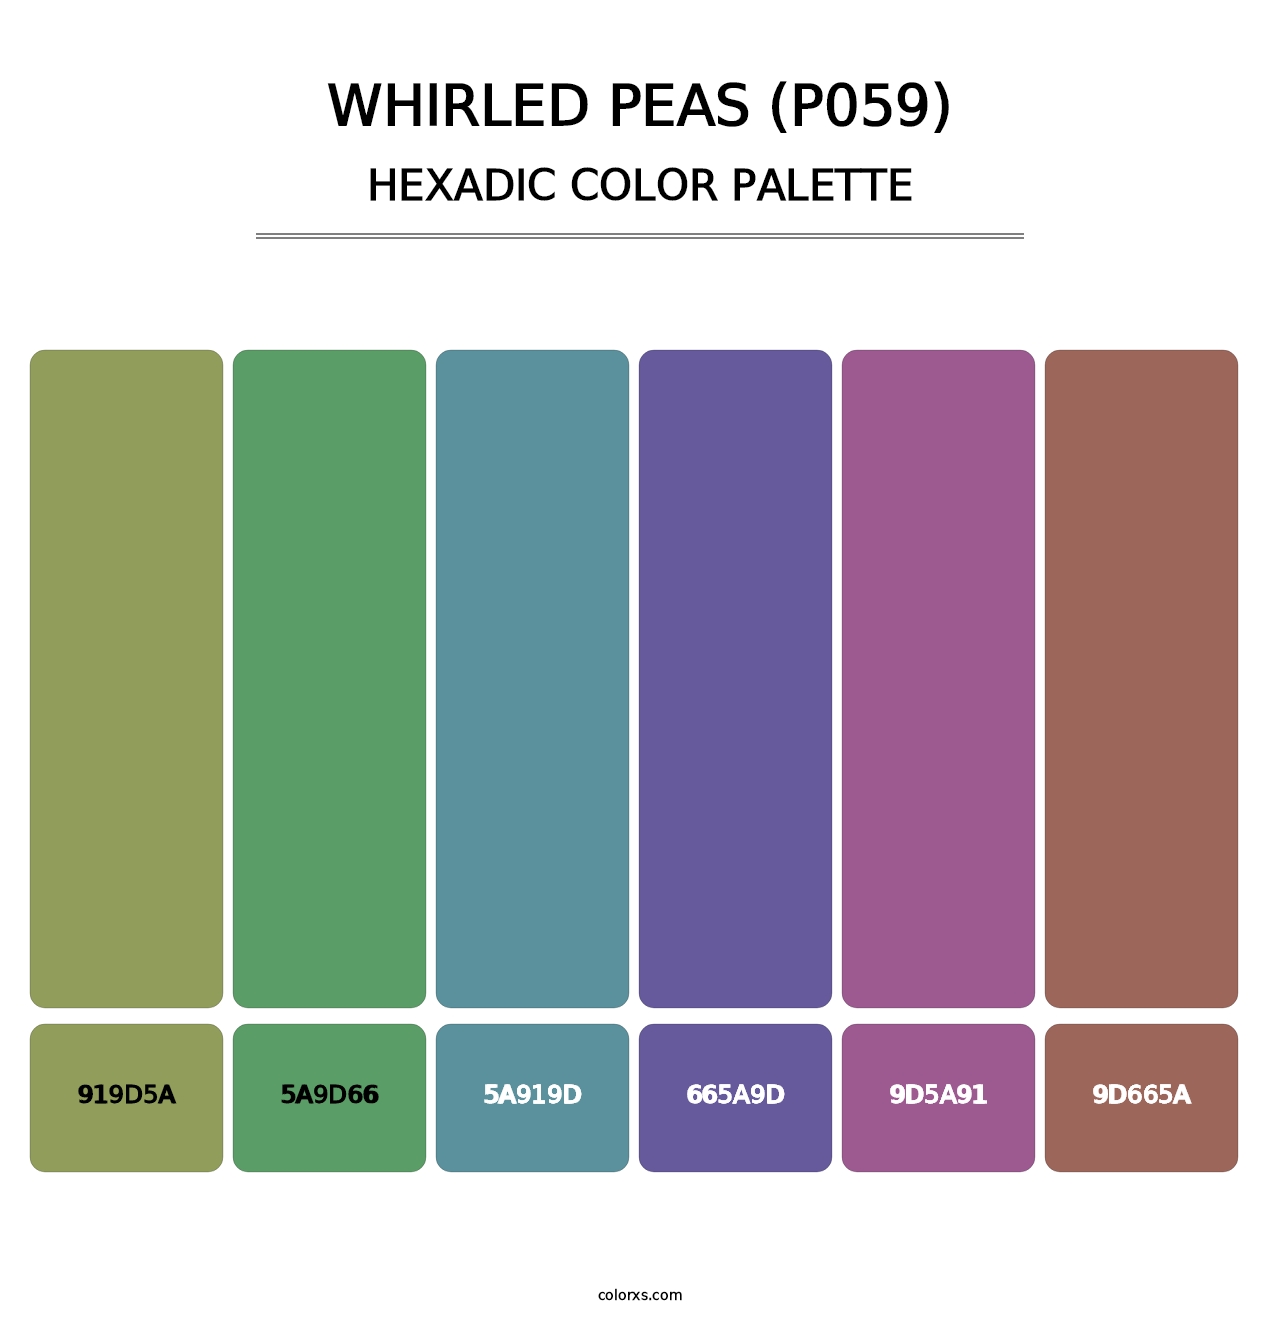 Whirled Peas (P059) - Hexadic Color Palette